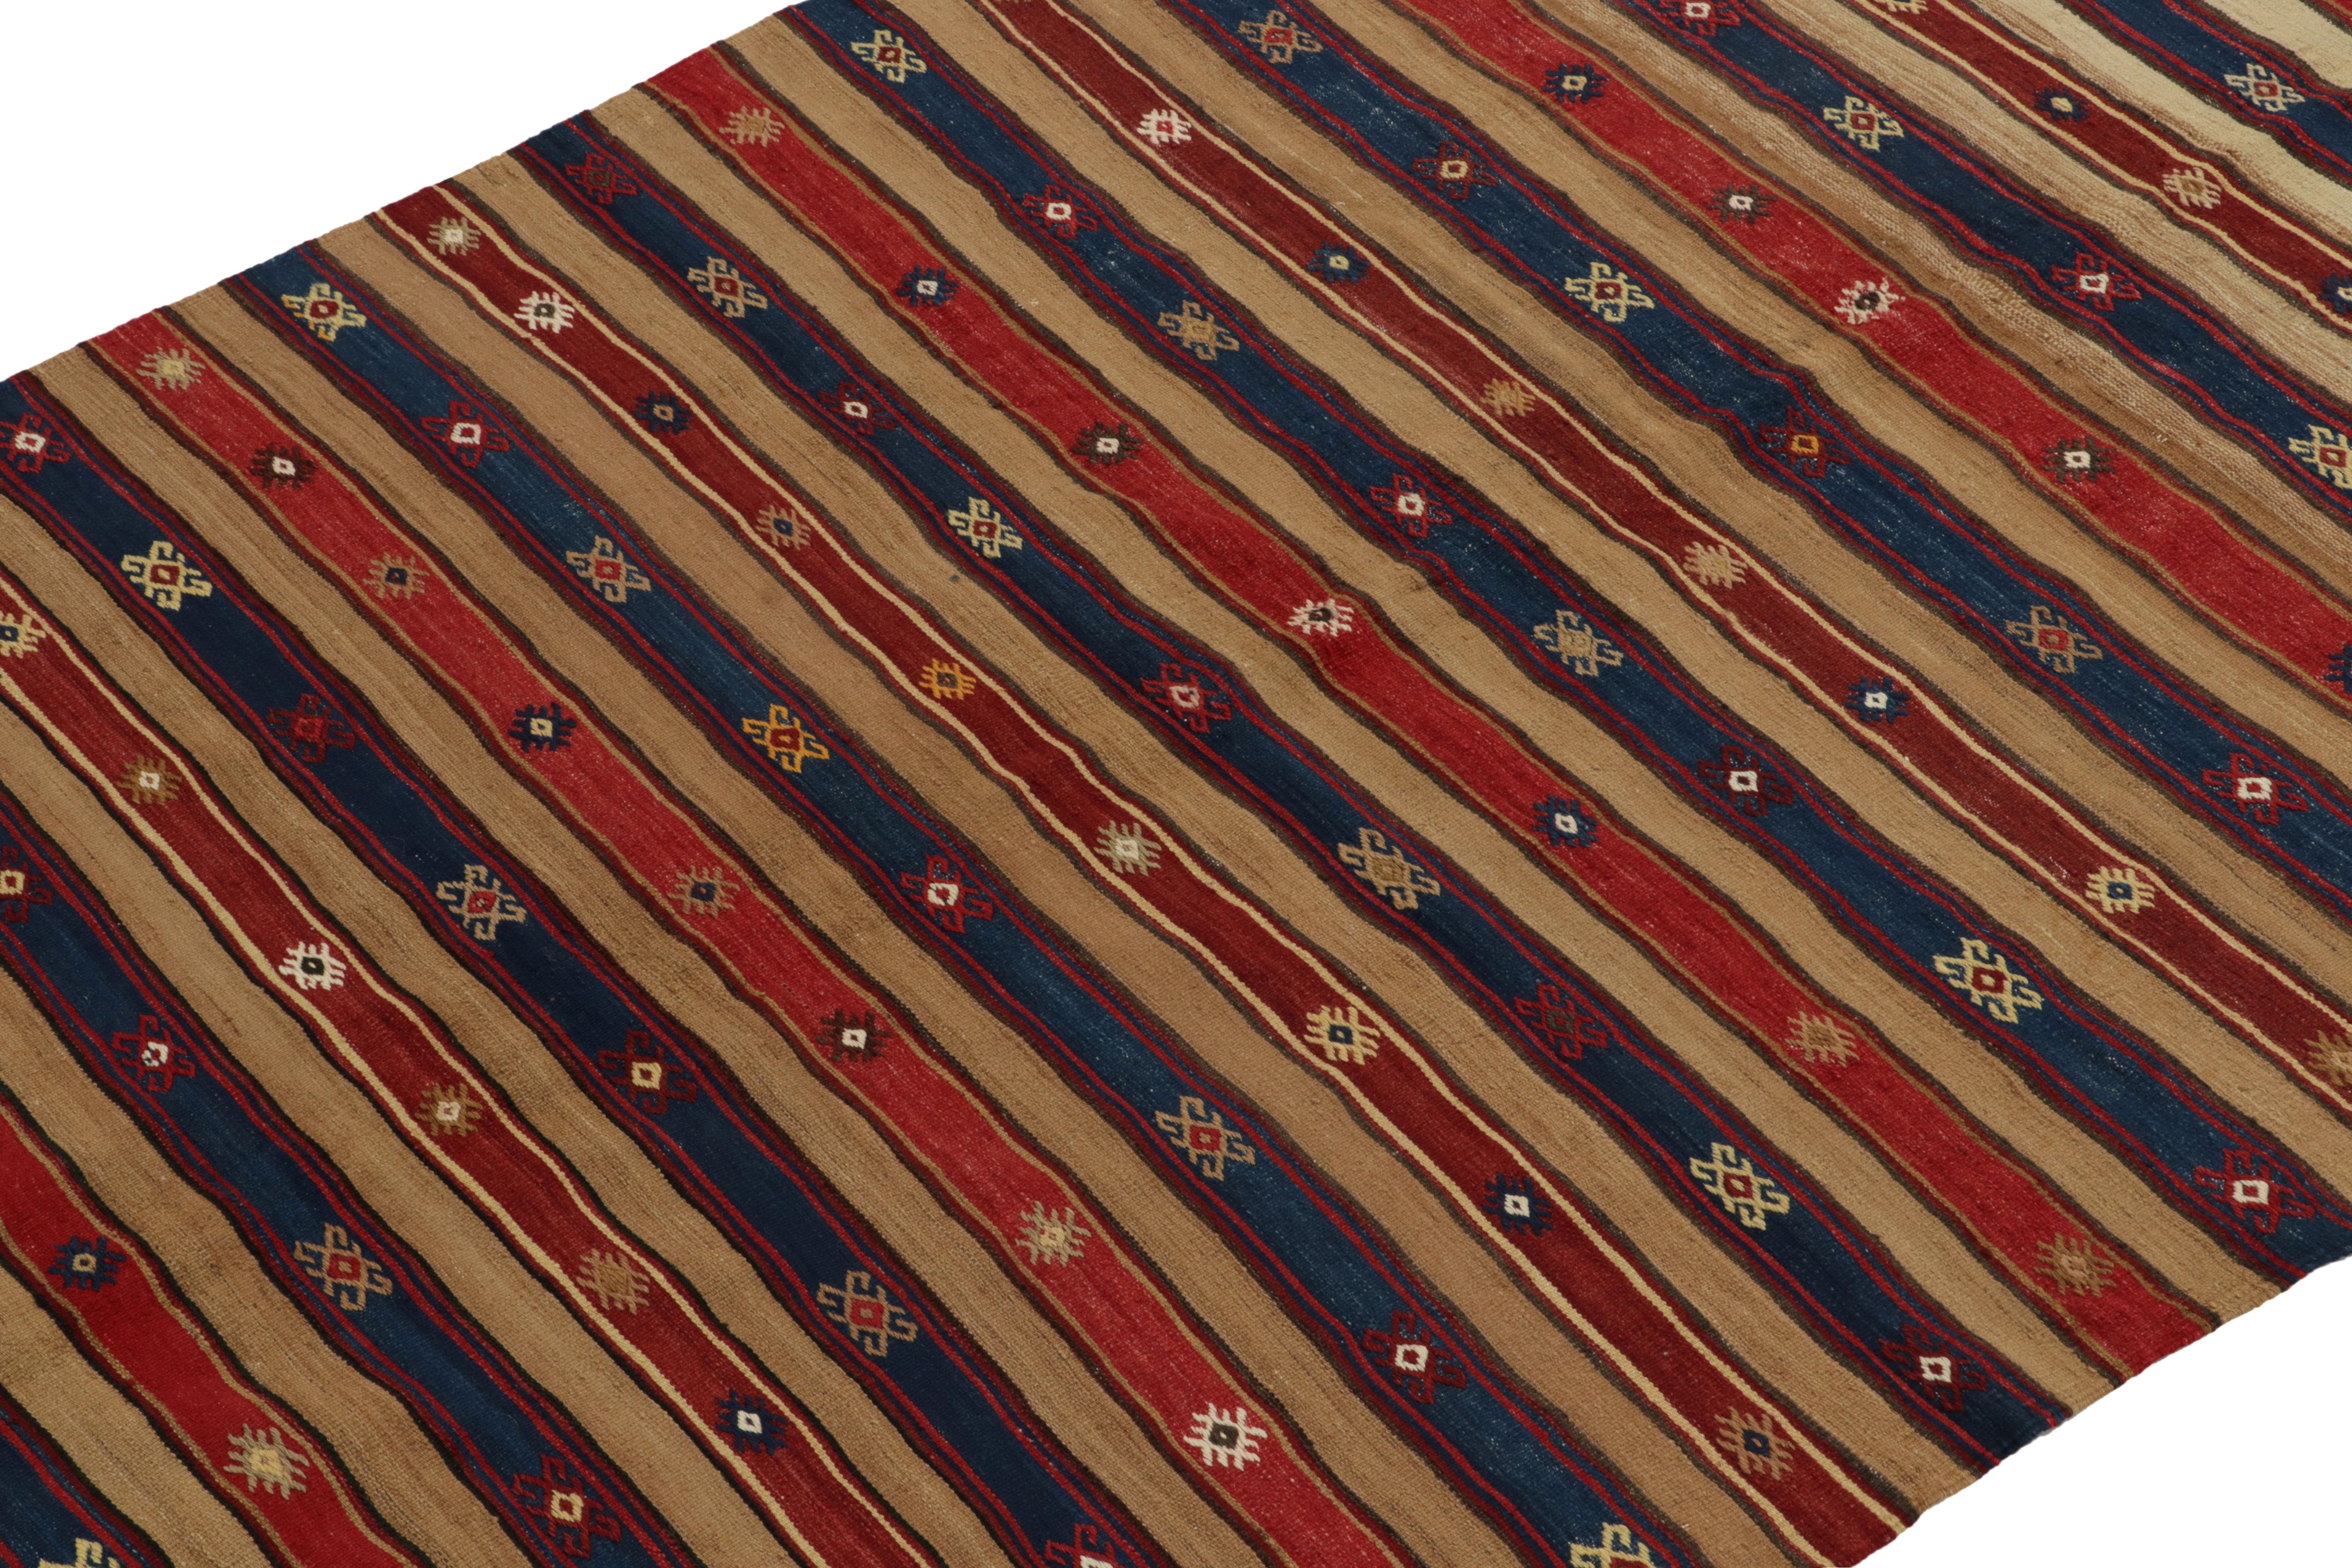 Hand-Woven 1950s Vintage Turkish Kilim in Red, Blue and Beige-Brown Stripes by Rug & Kilim